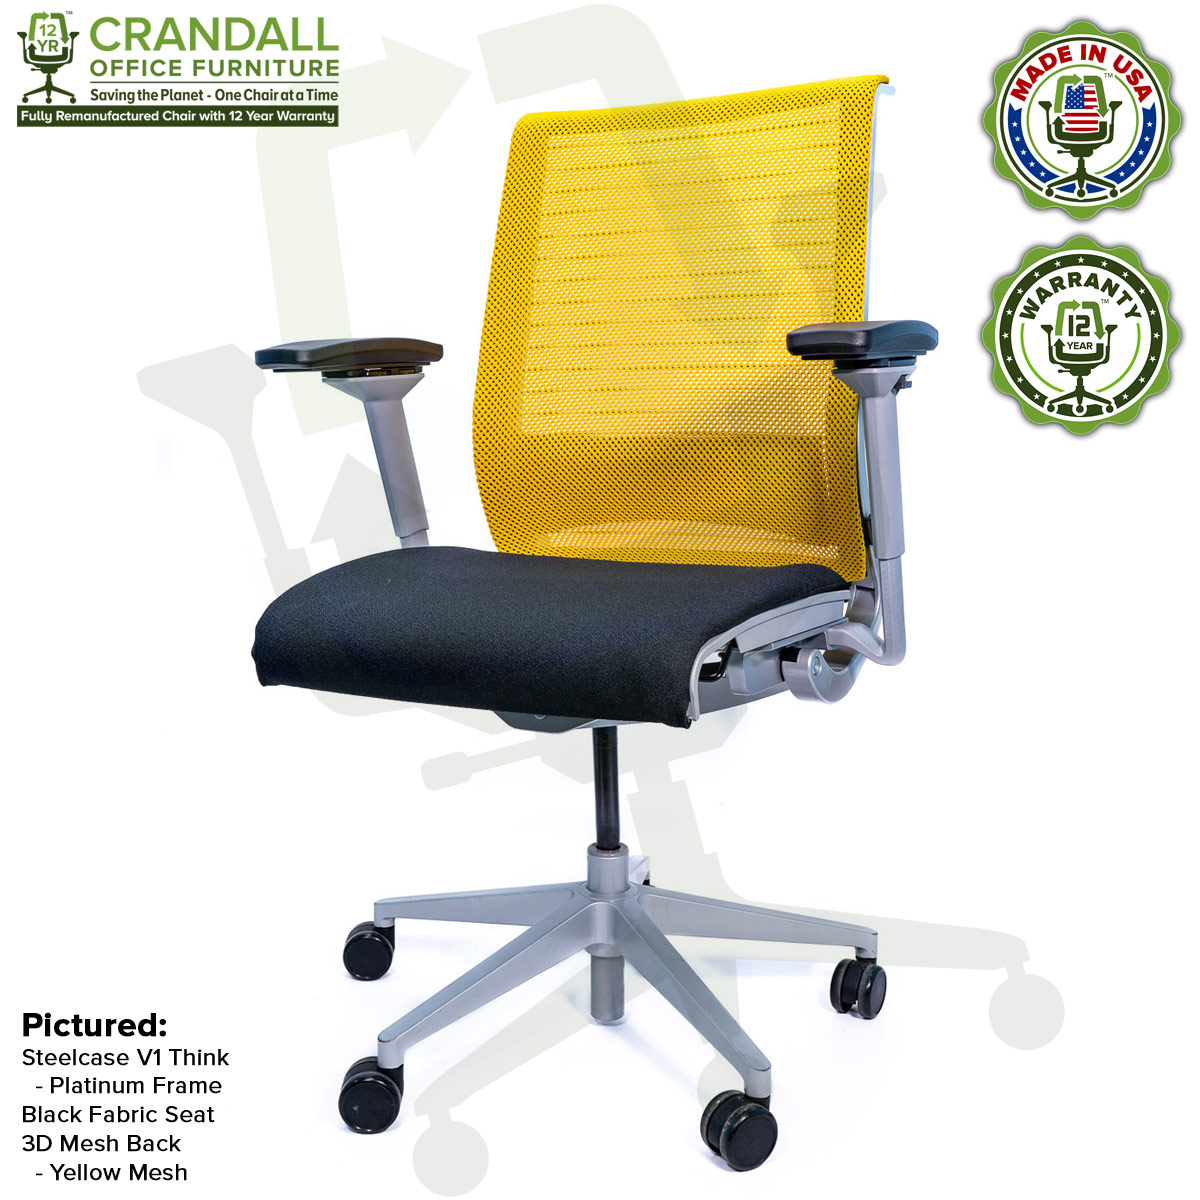 Crandall Office Furniture Remanufactured Steelcase Think Chair with 12 Year Warranty - Platinum Frame - Yellow Mesh